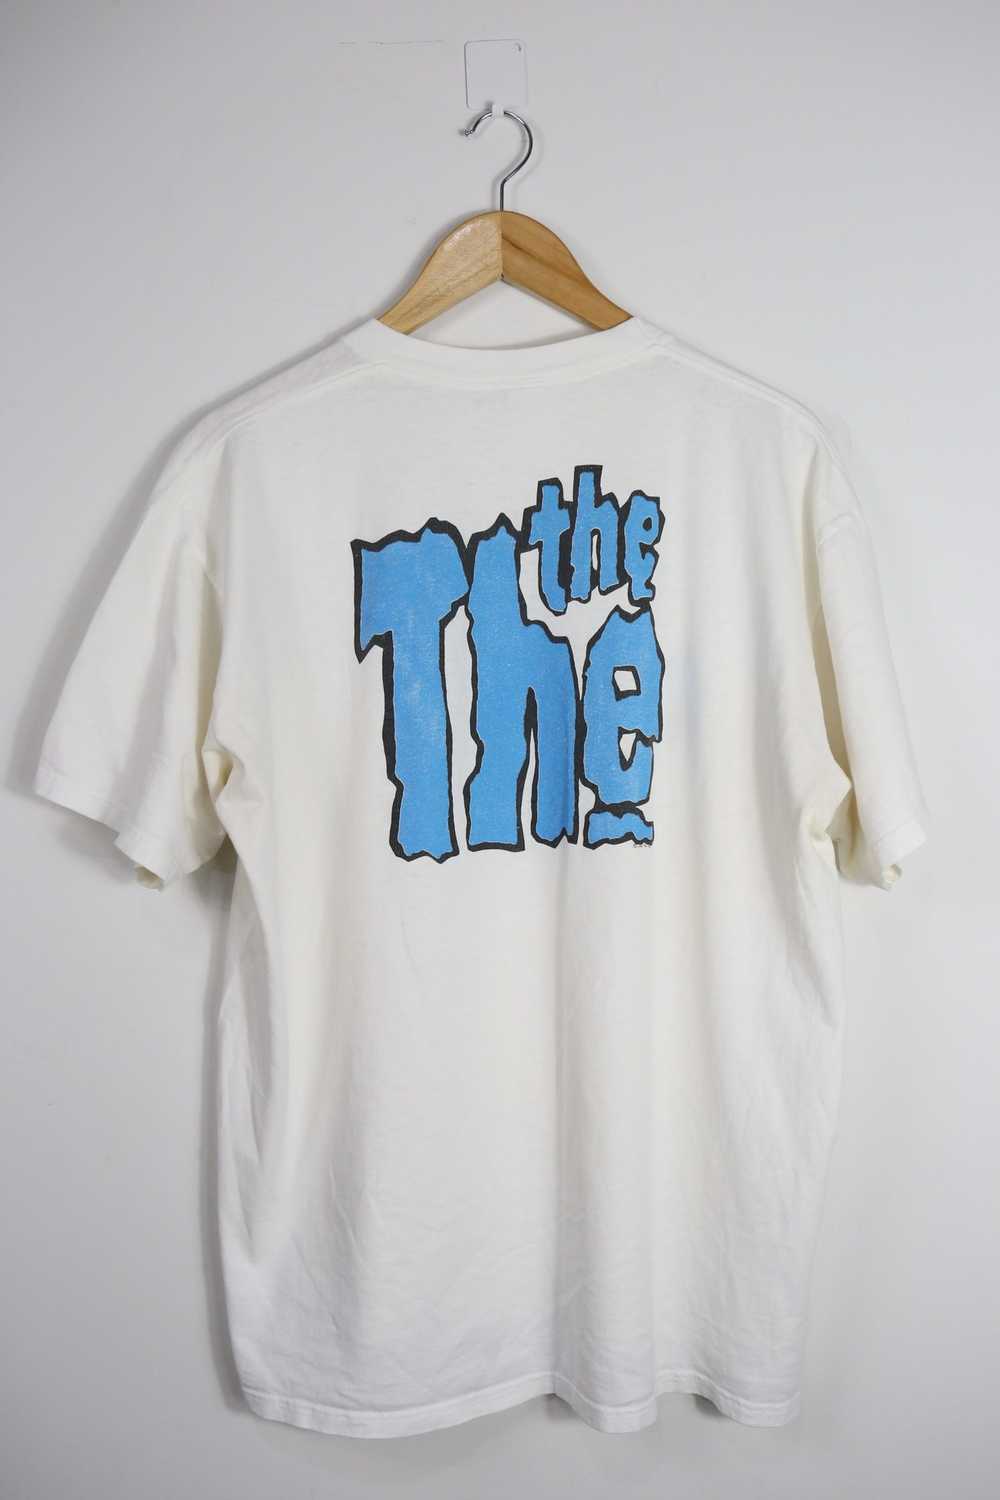 Band Tees Vintage The The (XL) - image 1